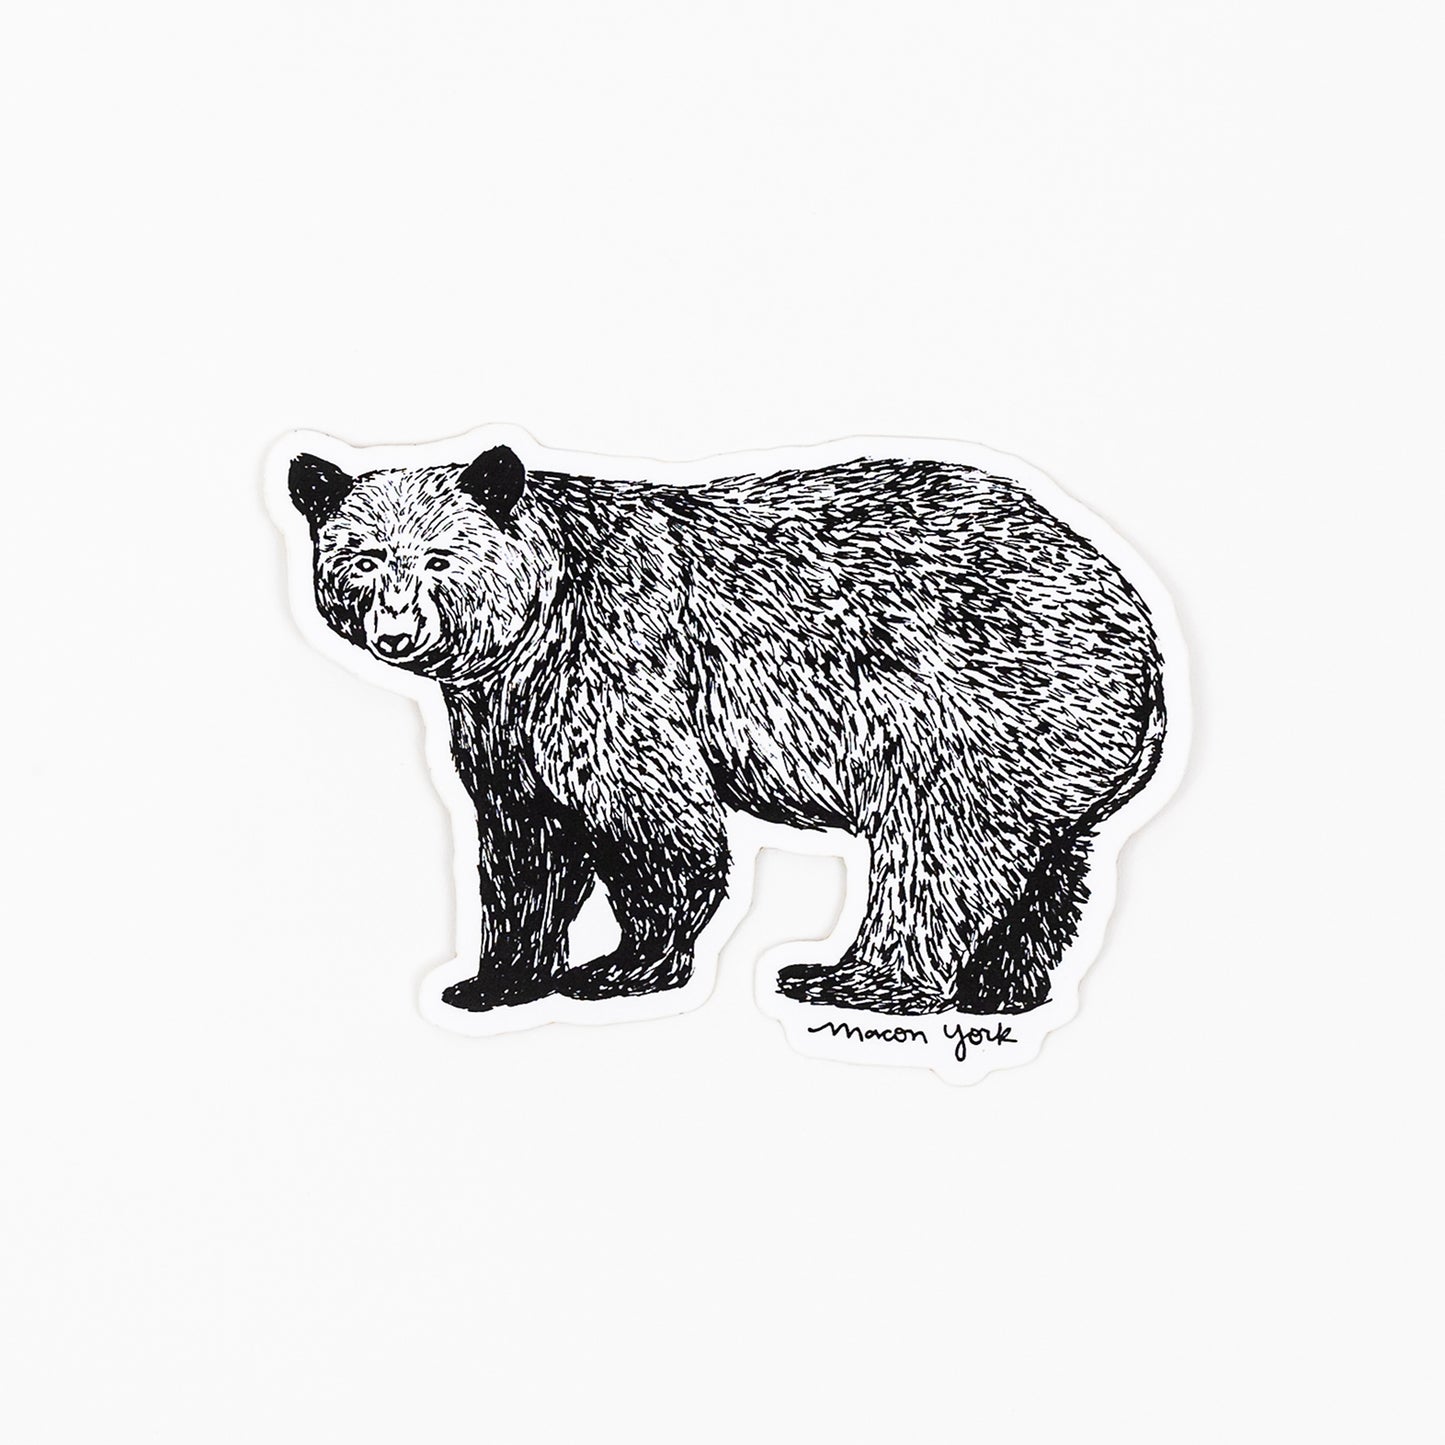 Vinyl sticker featuring a hand-drawn adult Appalachian Black Bear. The bear is looking directly at you with a happy expression. 3.5" x 3"